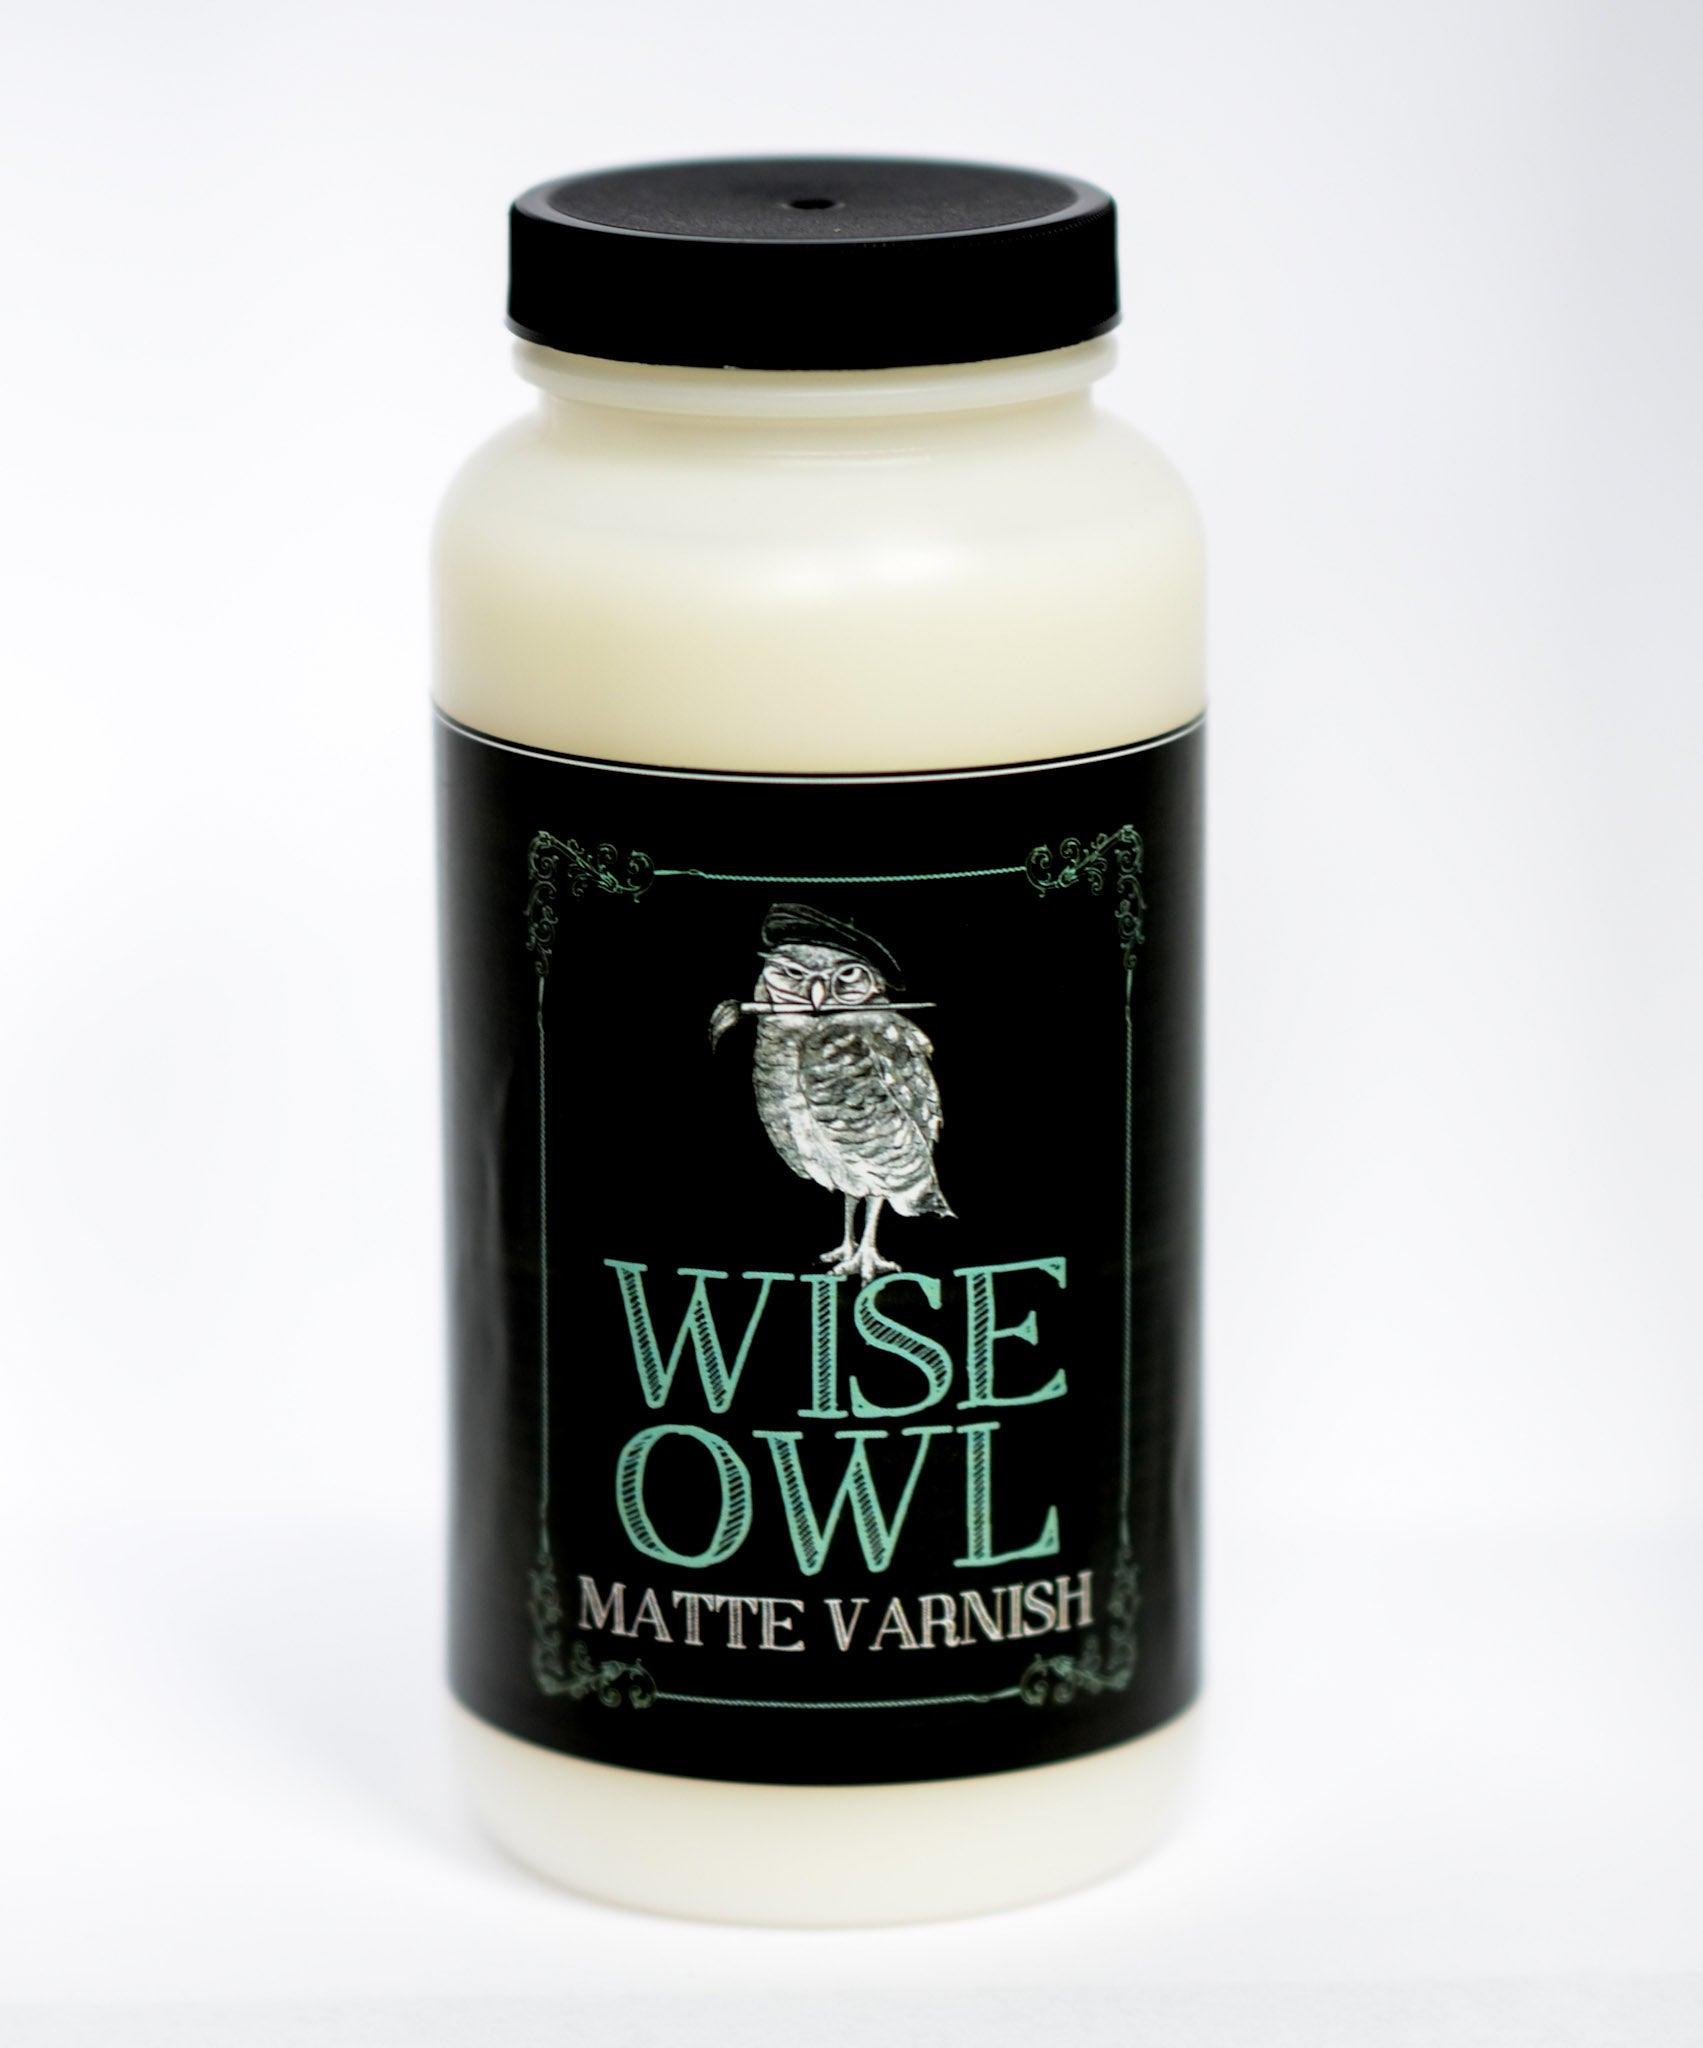 Wise Owl Paint Varnish - The 3 Painted Pugs